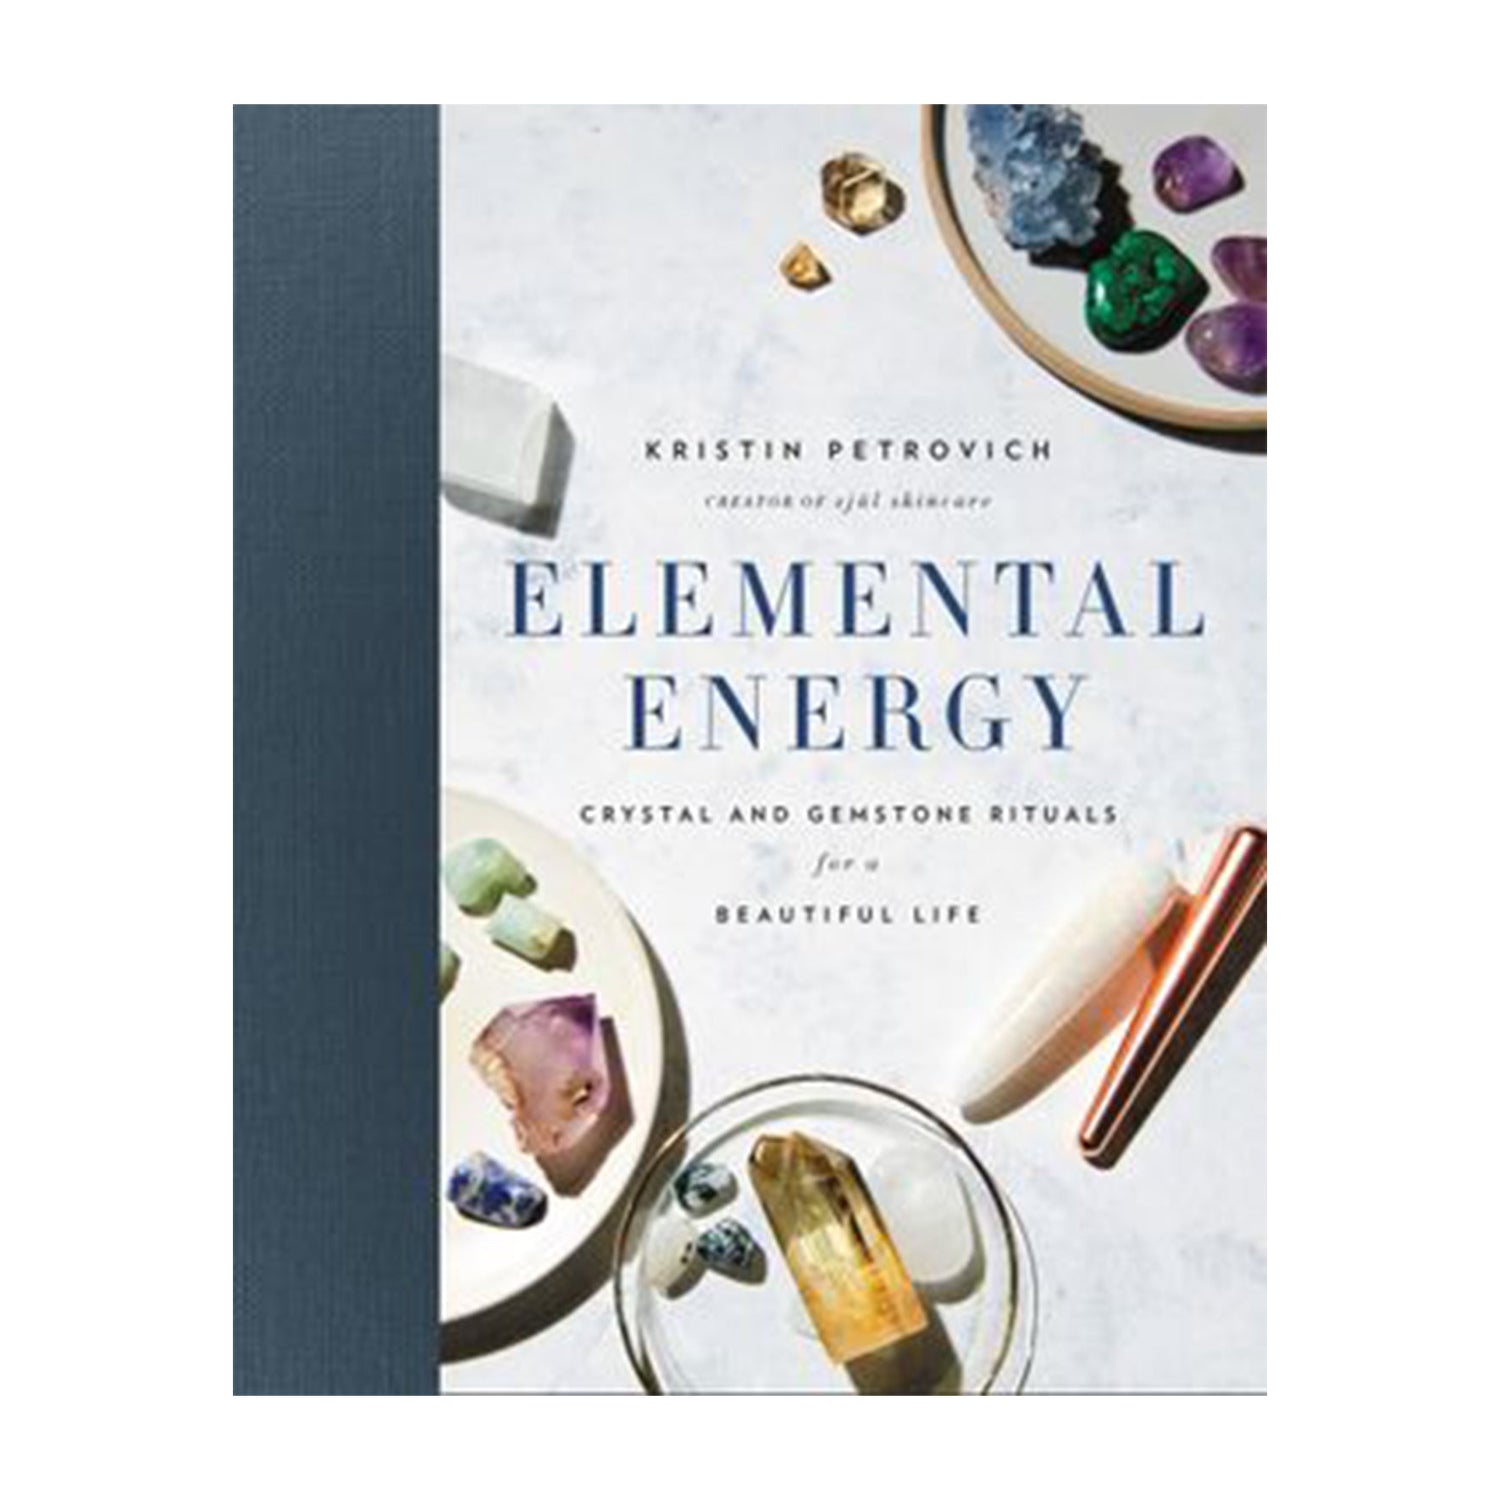 Elemental Energy: Crystal And Gemstone Rituals For A Beautif - Altasphere